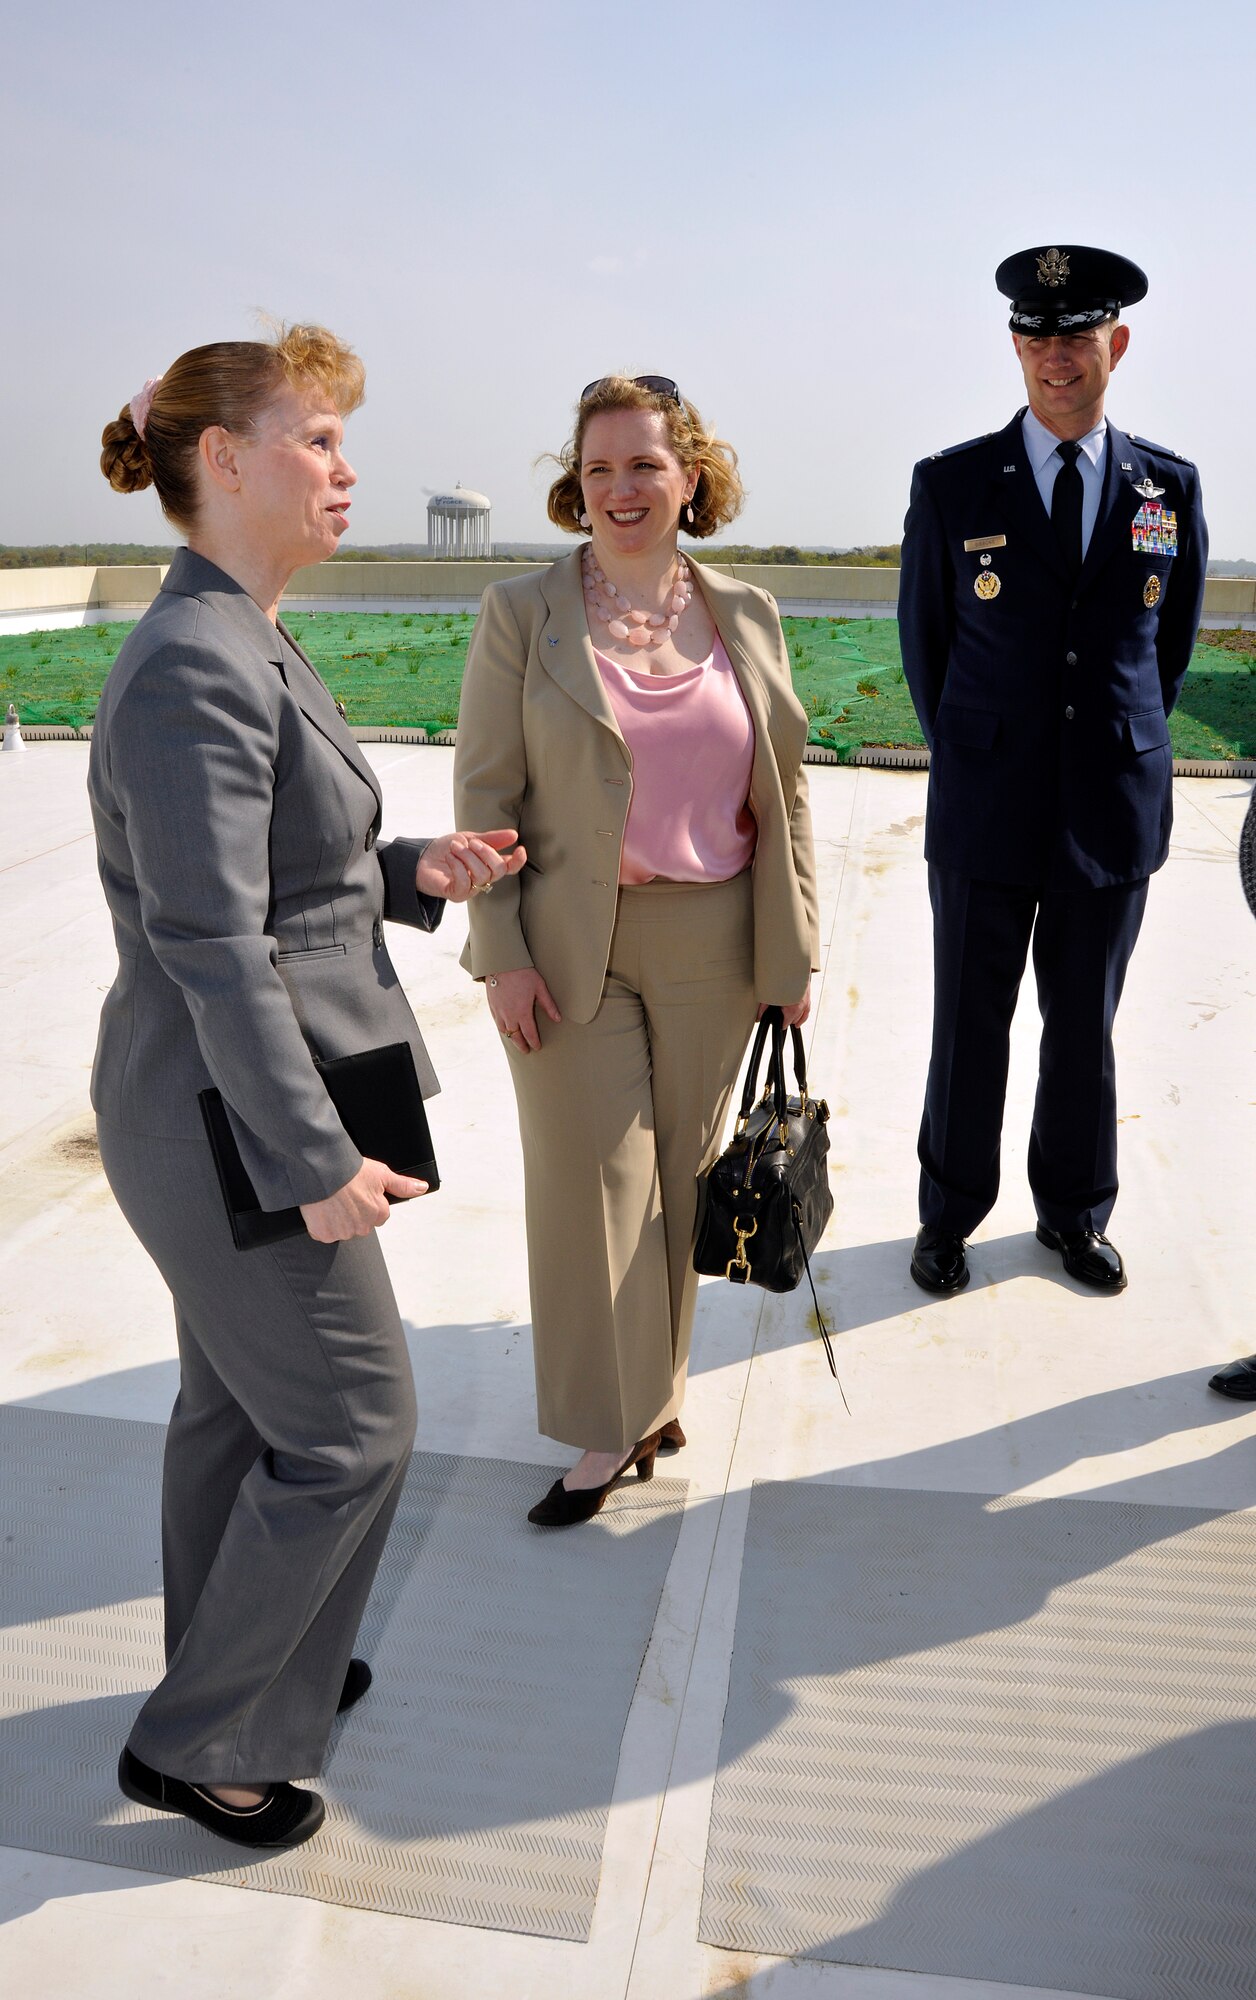 (From left) Susan Bench-Snow, Secretary of the Air Force Administrative Assistant Facilities director, Erin Conaton, Under Secretary of the Air Force, and Col. Phillip Gibbons, Air Force District Washington vice commander, tour the green roof of the new William A. Jones III Building, following an Earth Day and Arbor Day tree planting ceremony at Joint Base Andrews, Md., April 20, 2011. The new Jones building is constructed of more than 20 percent recycled material and features storm water recycling systems and green roofing which will help make the infrastructure energy efficient.  These features will save the Air Force 44.7 percent annually on energy costs compared to the offices the new building replaces.  (U.S. Air Force photo/ Senior Airman Melissa V. Brownstein)